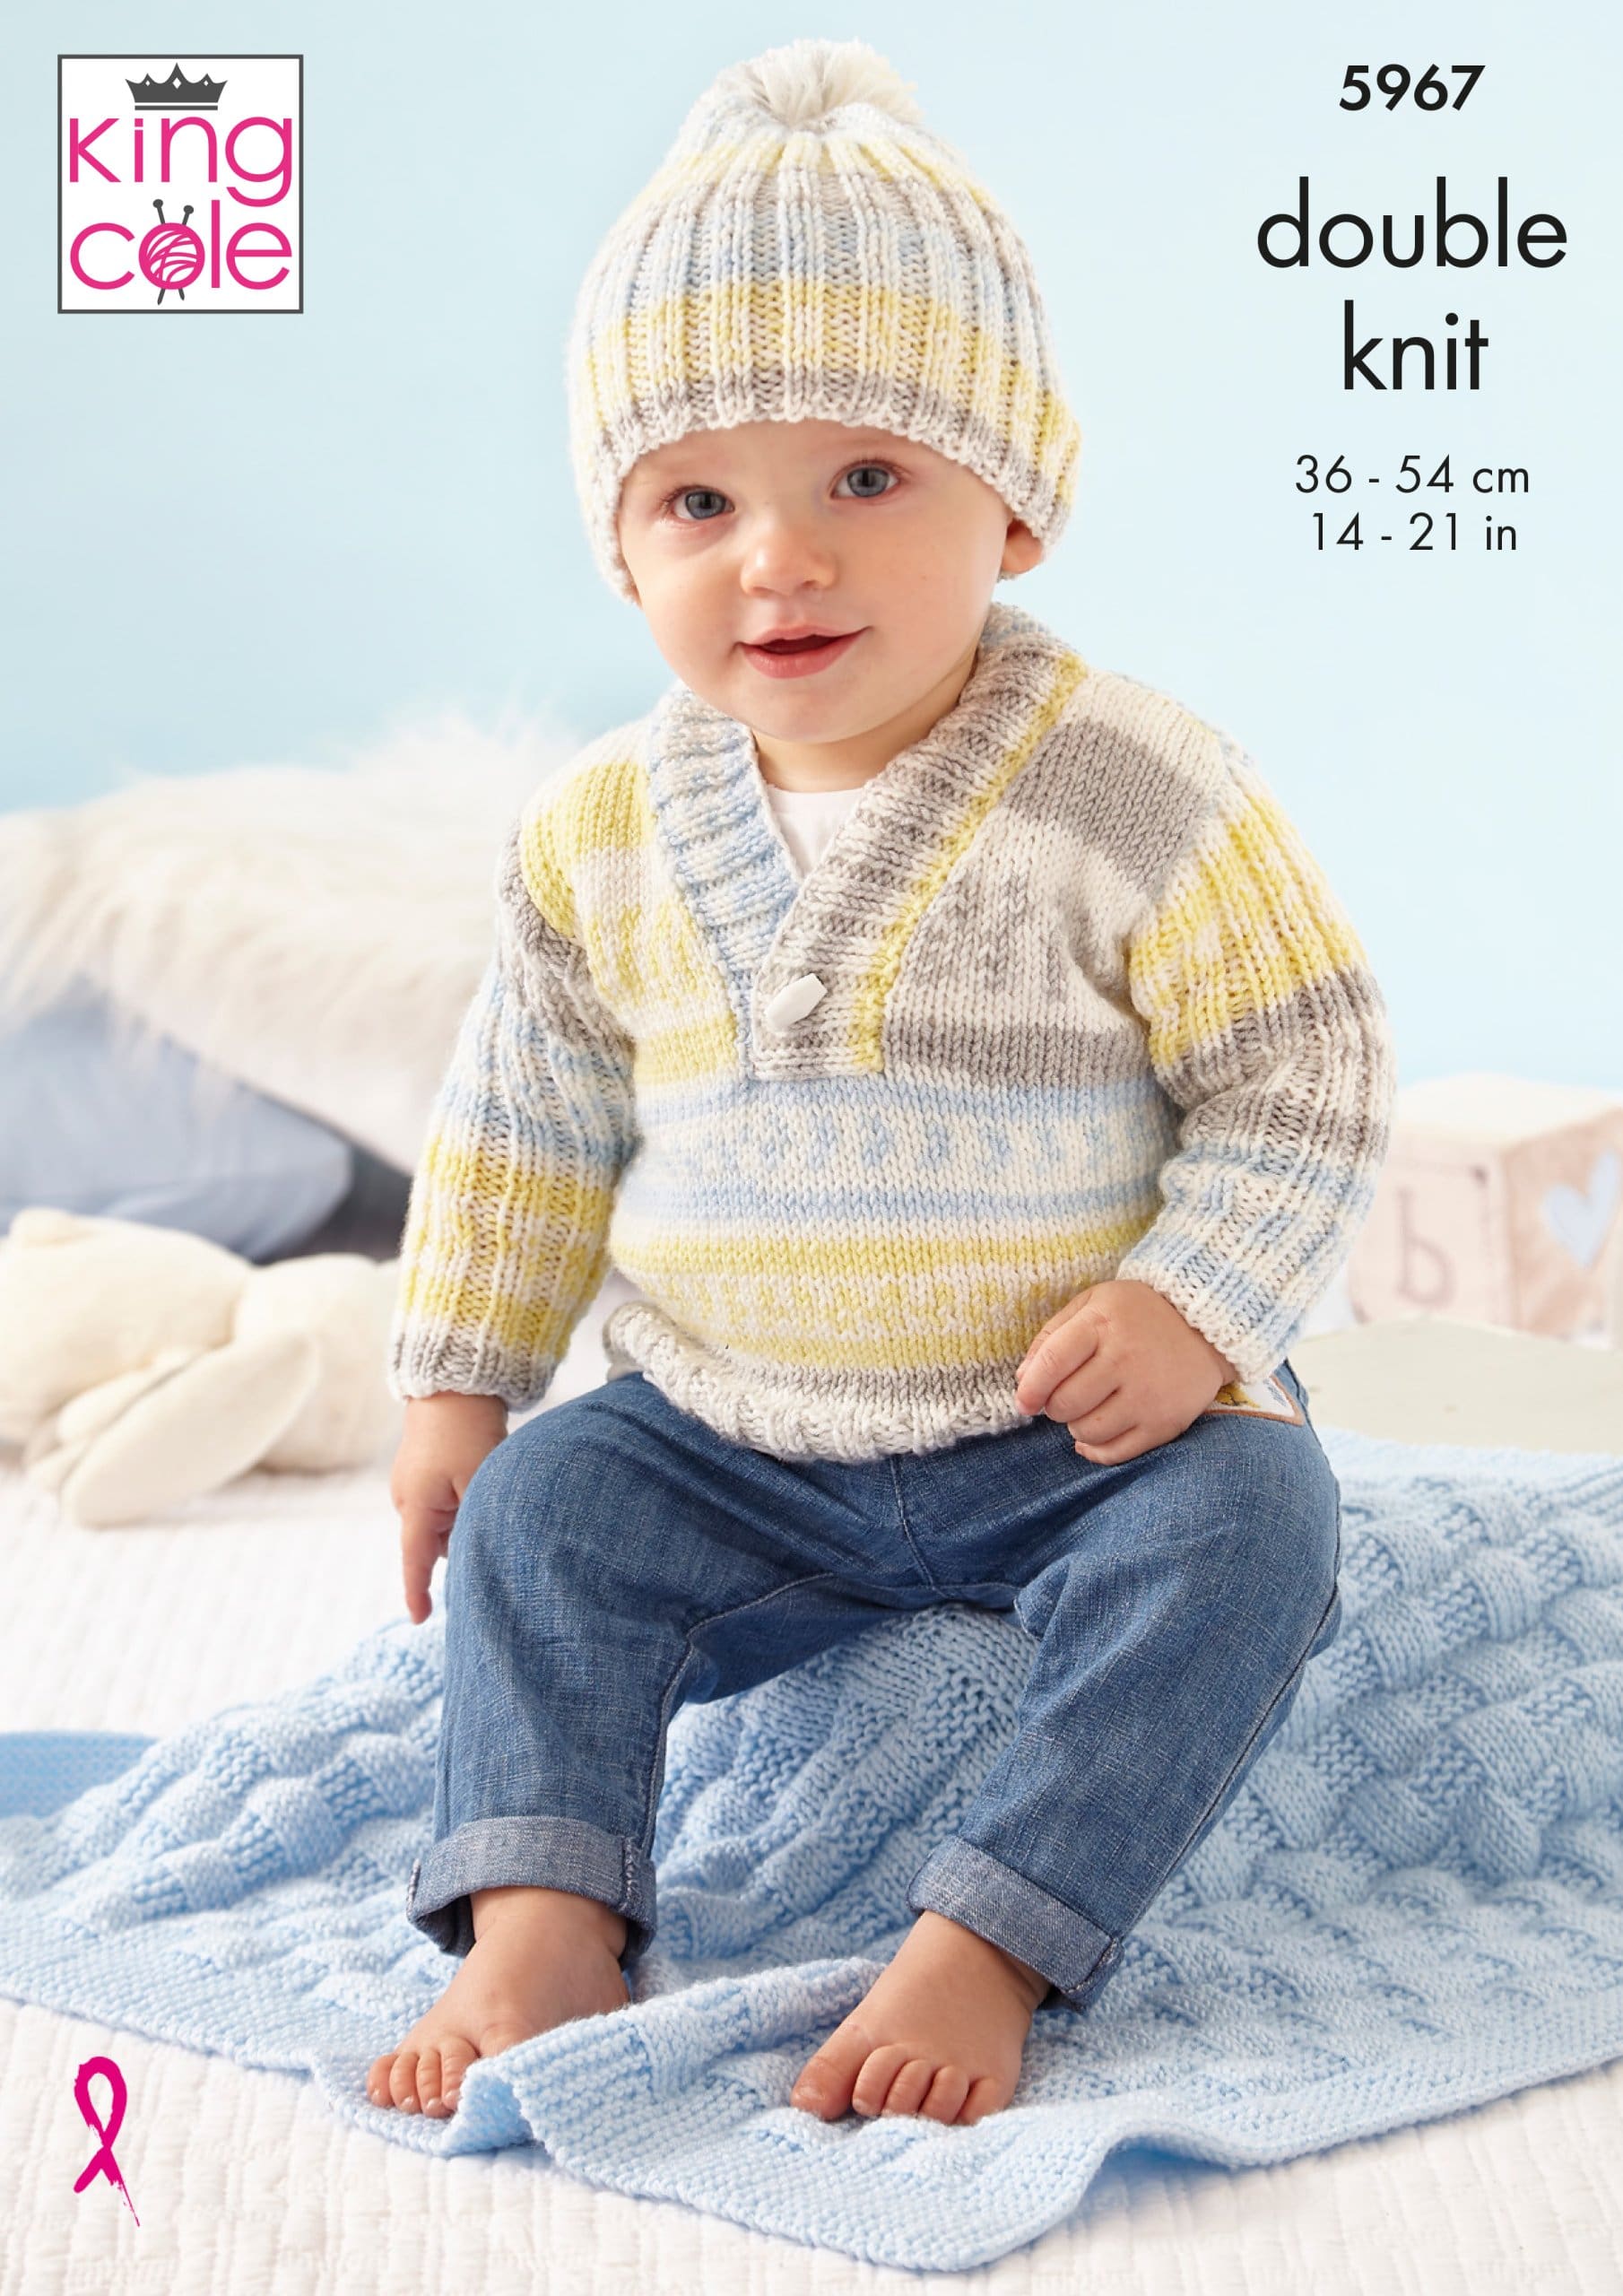 Easy to Follow Sweater, Cardigan, Hat & Blanket Knitted in Cherish DK ...